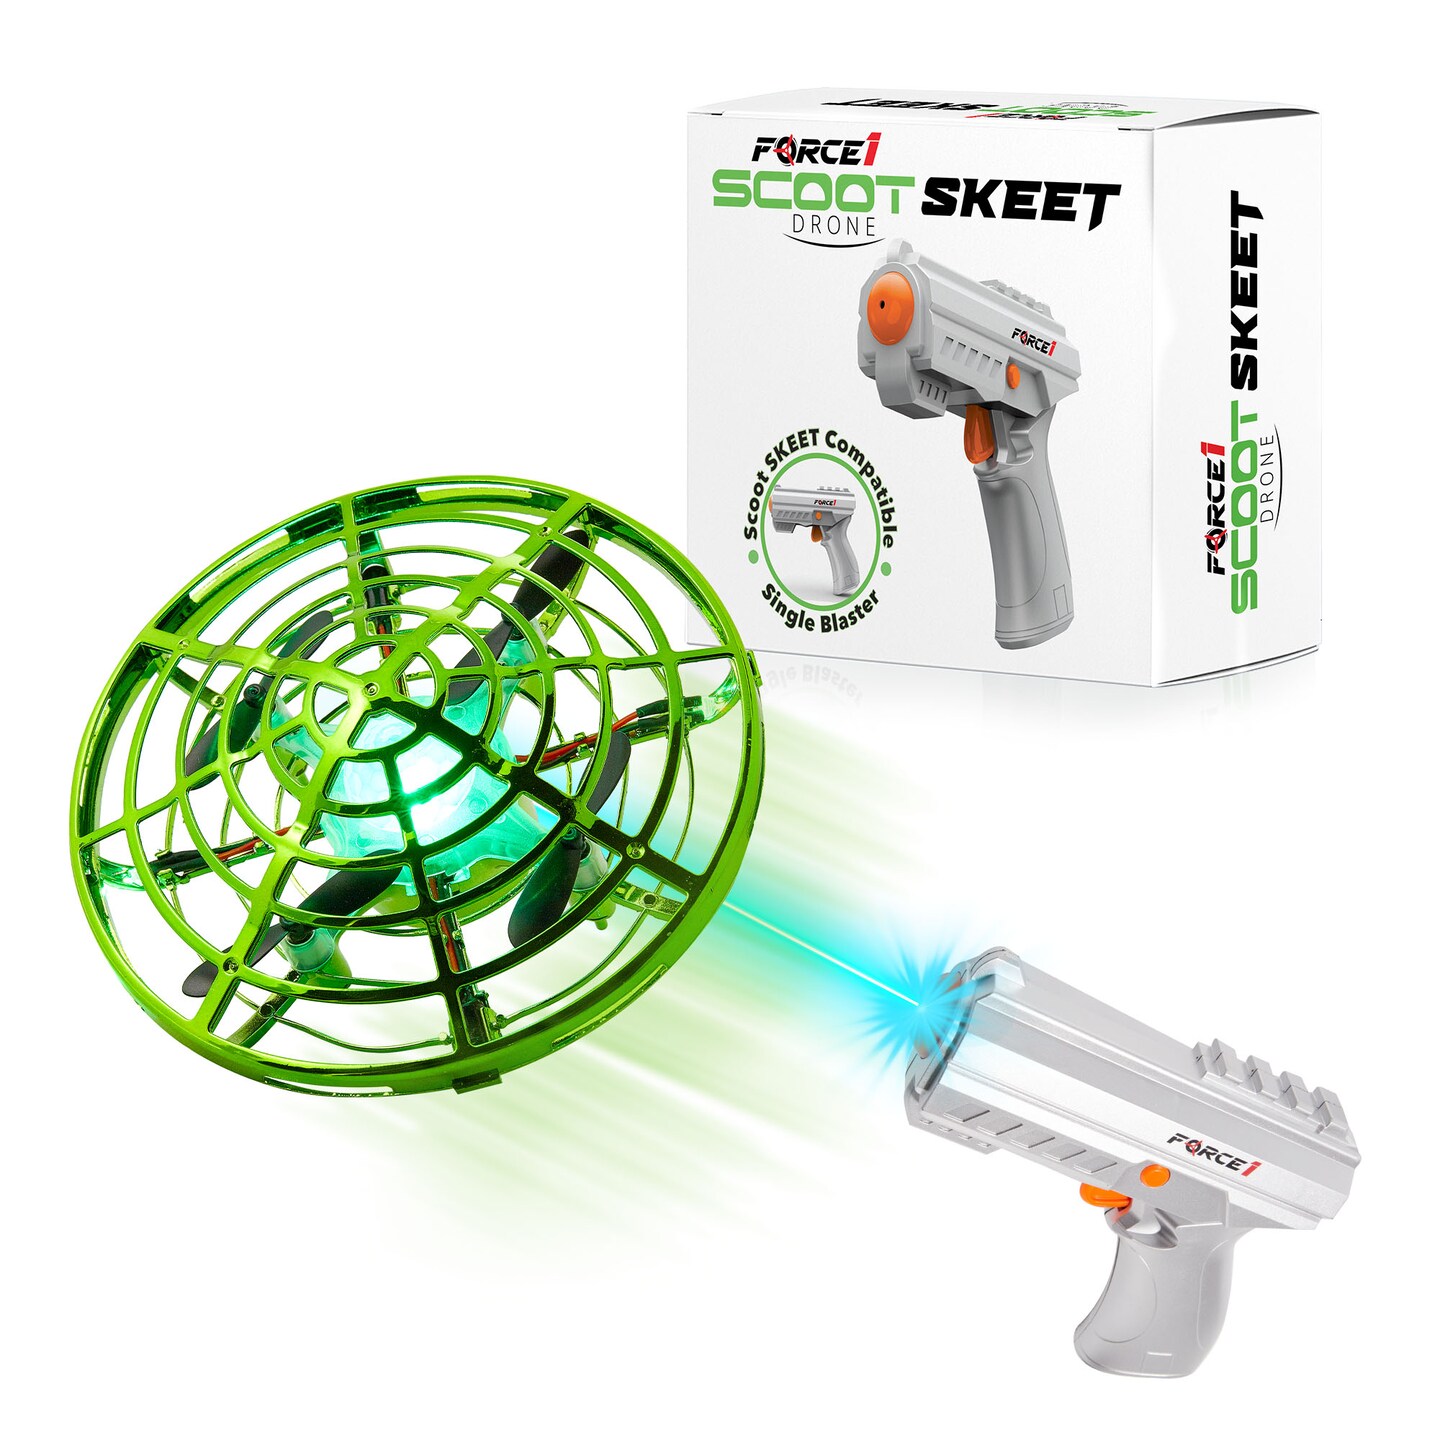 Force1 Blaster Gun Electronic Shooting Game for Kids and Adults (Blaster Only)